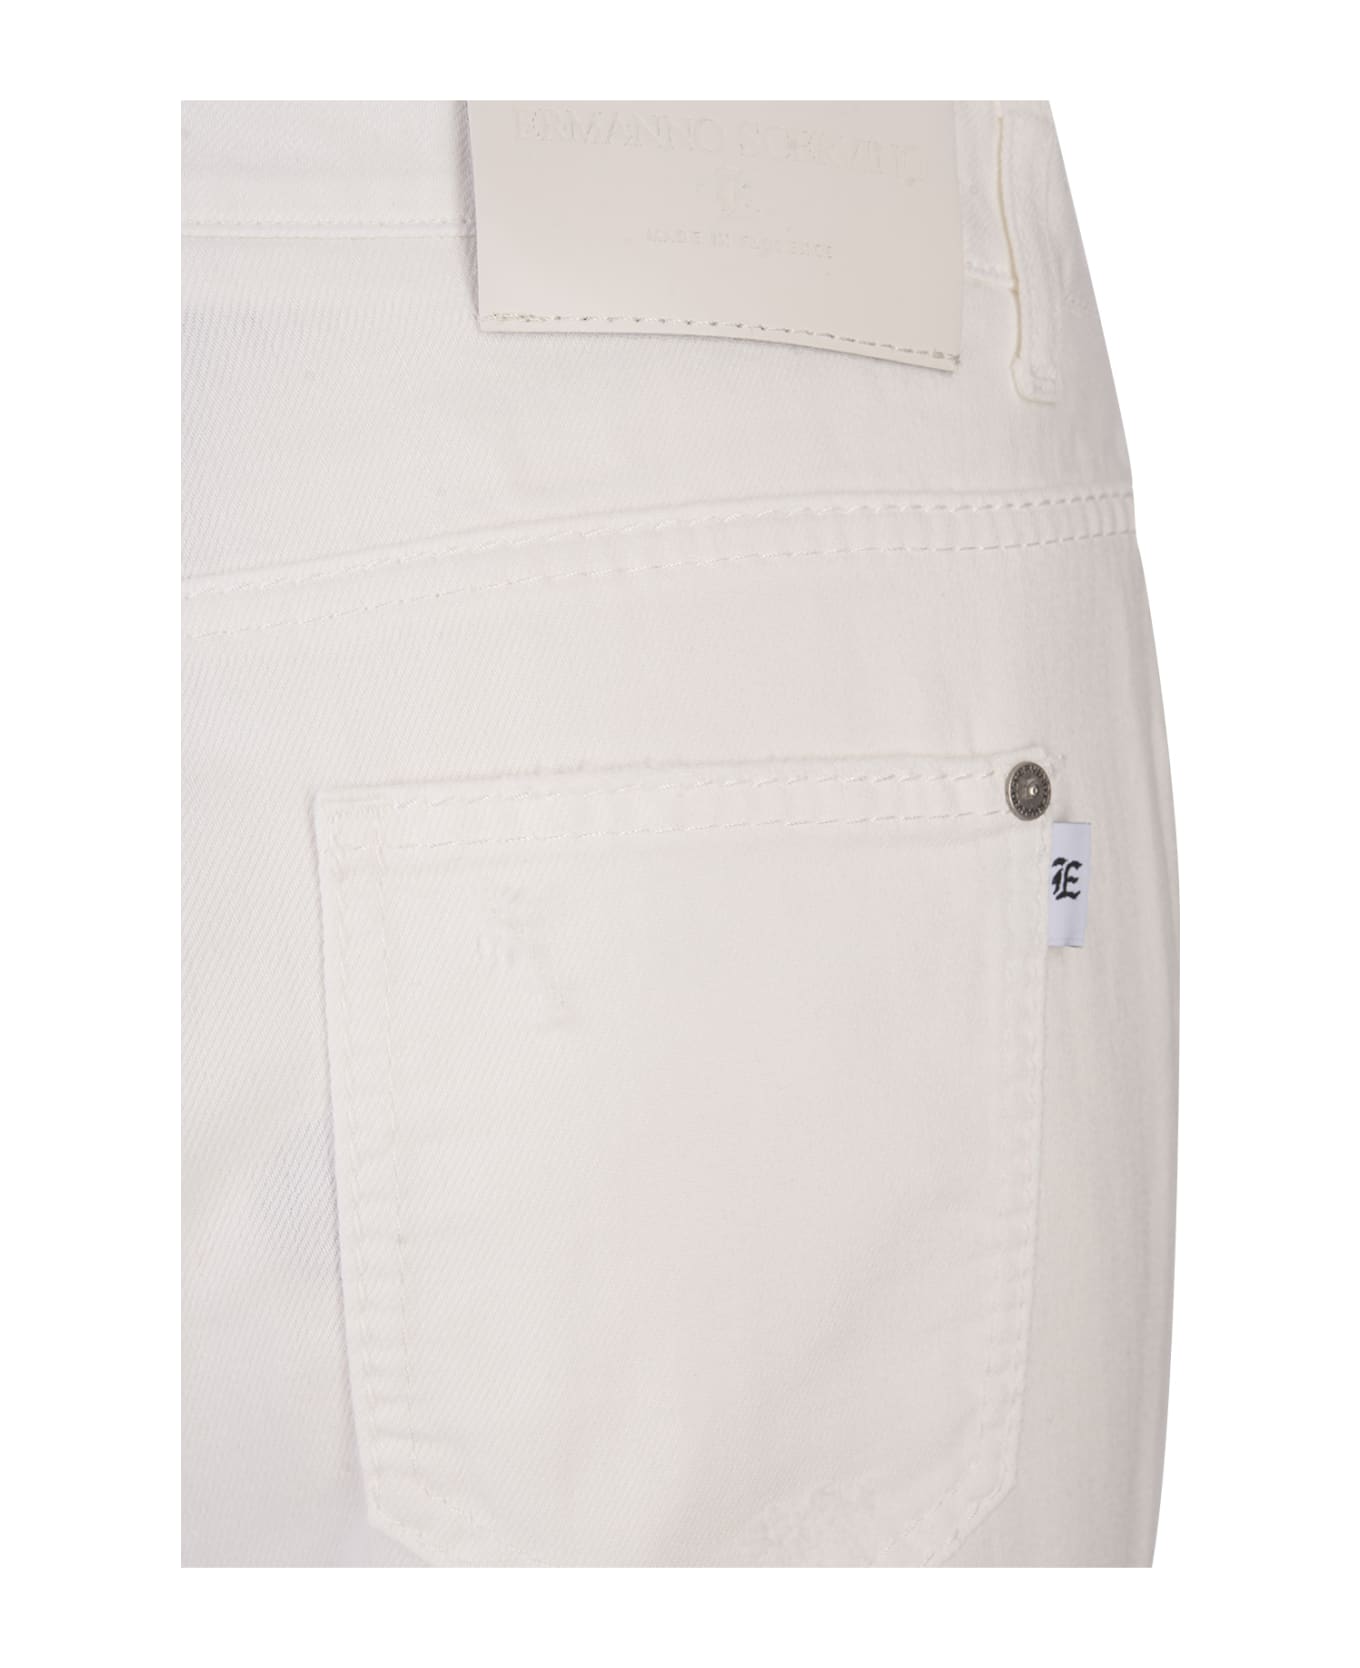 Ermanno Scervino White Bootcut Jeans With Sangallo Lace Cut-outs - White ボトムス